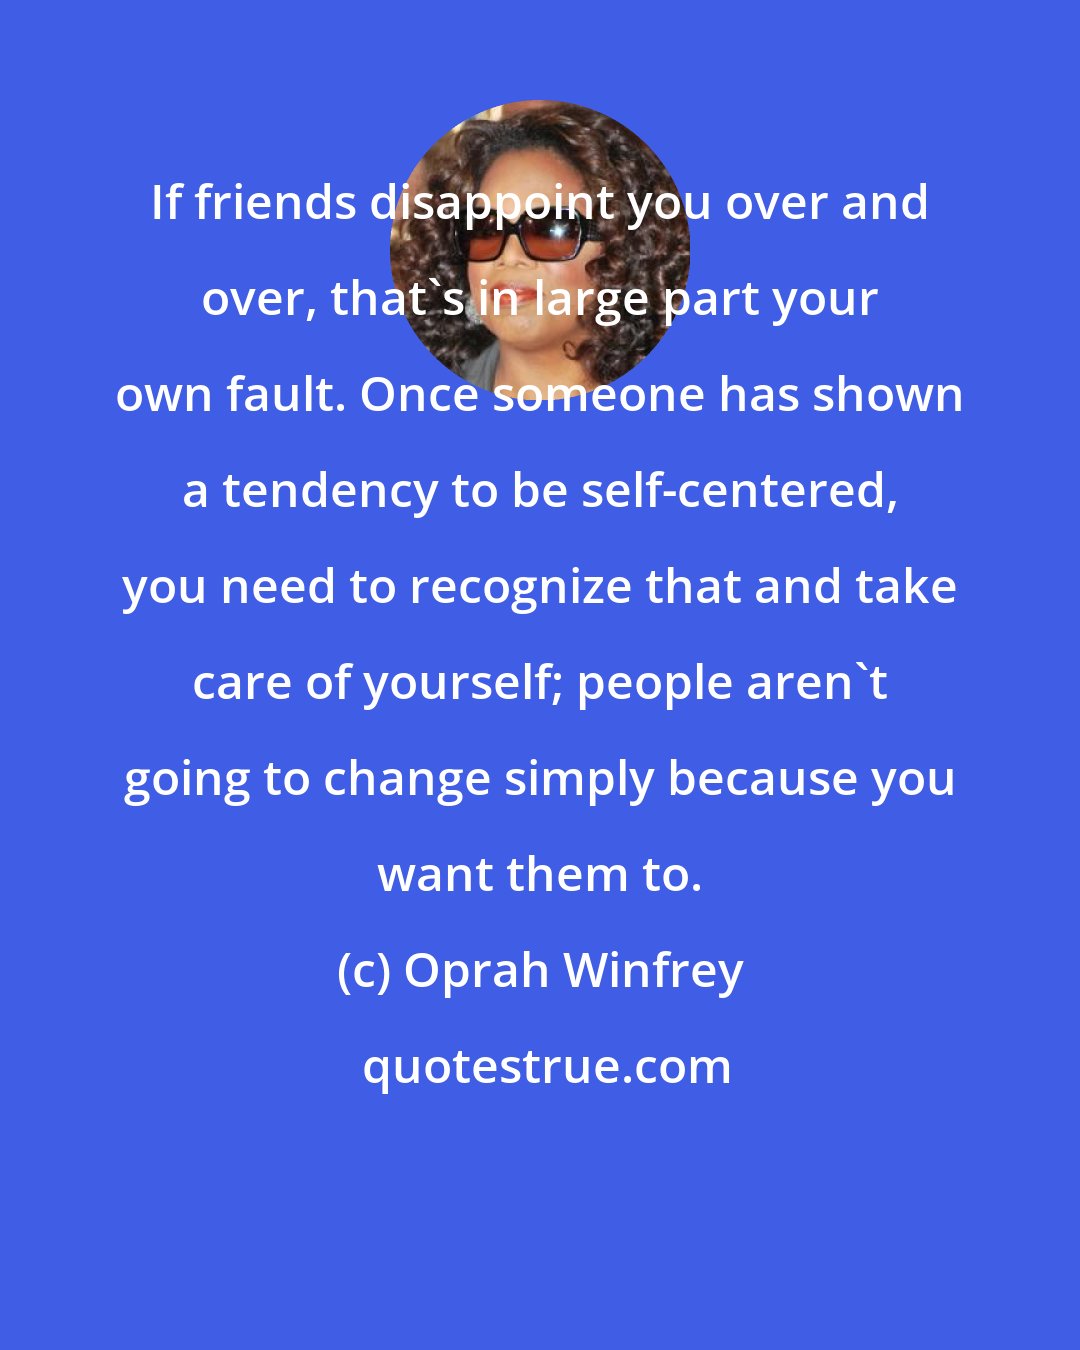 Oprah Winfrey: If friends disappoint you over and over, that's in large part your own fault. Once someone has shown a tendency to be self-centered, you need to recognize that and take care of yourself; people aren't going to change simply because you want them to.